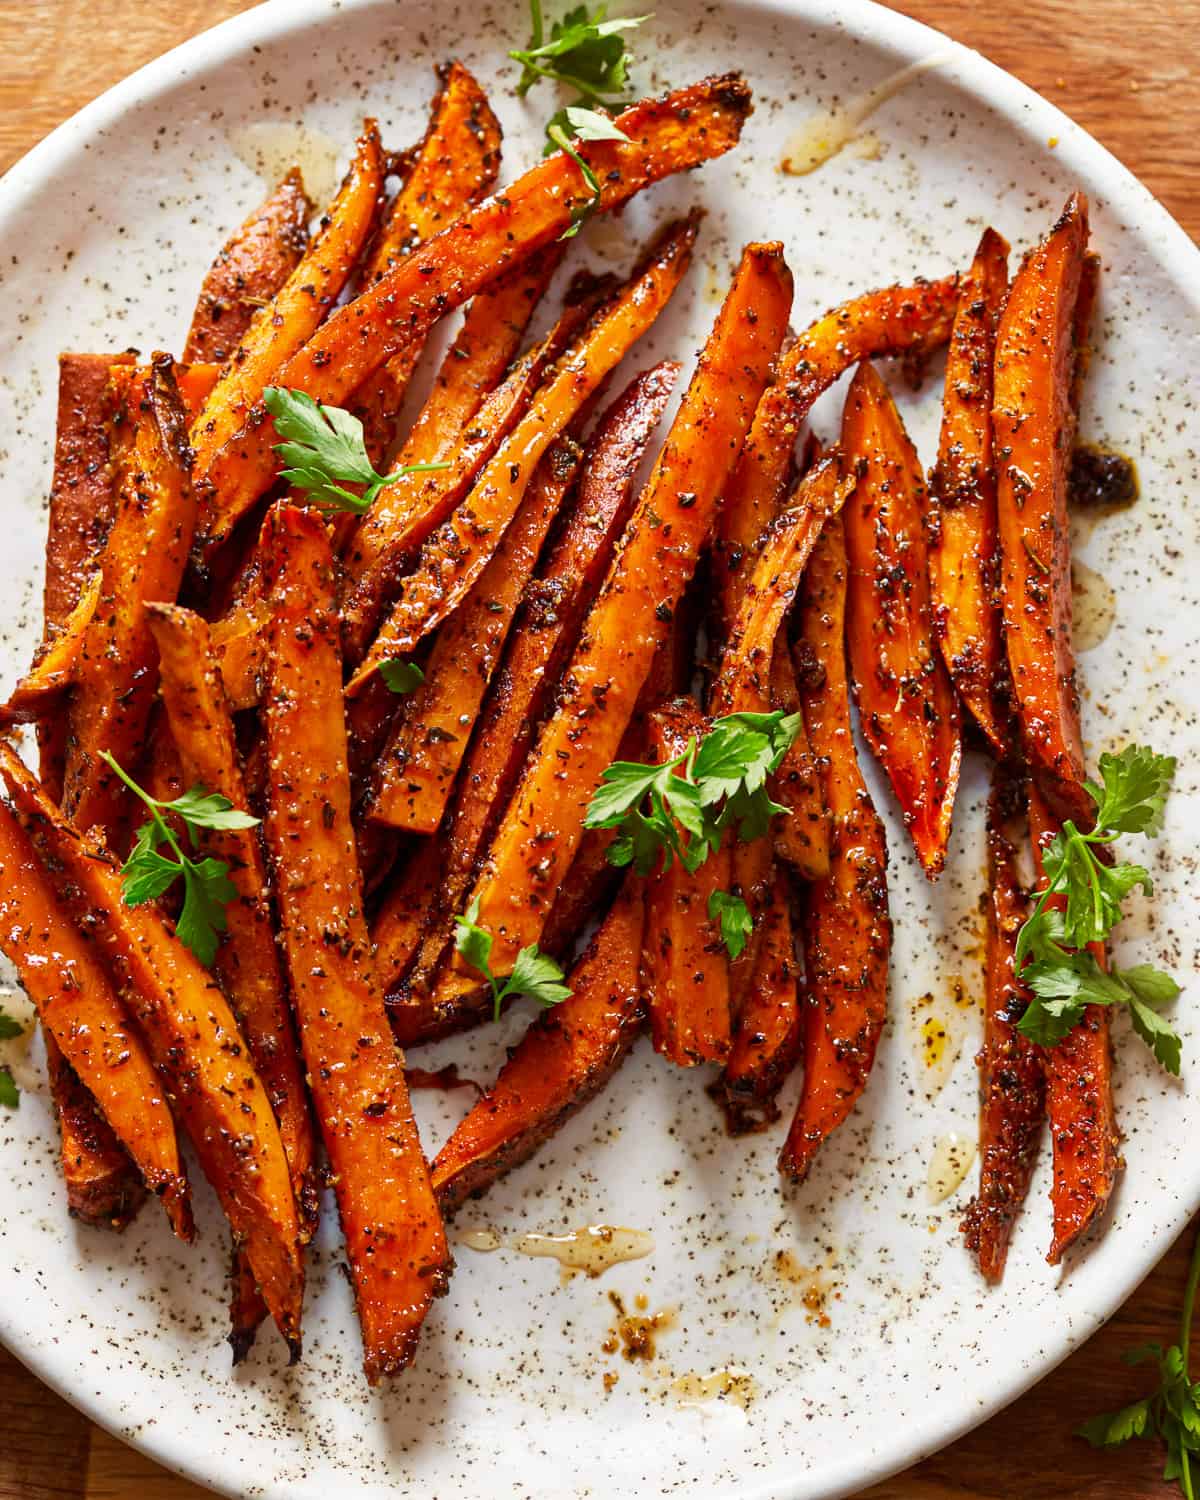 sweet potato fries on a plate with herbs.